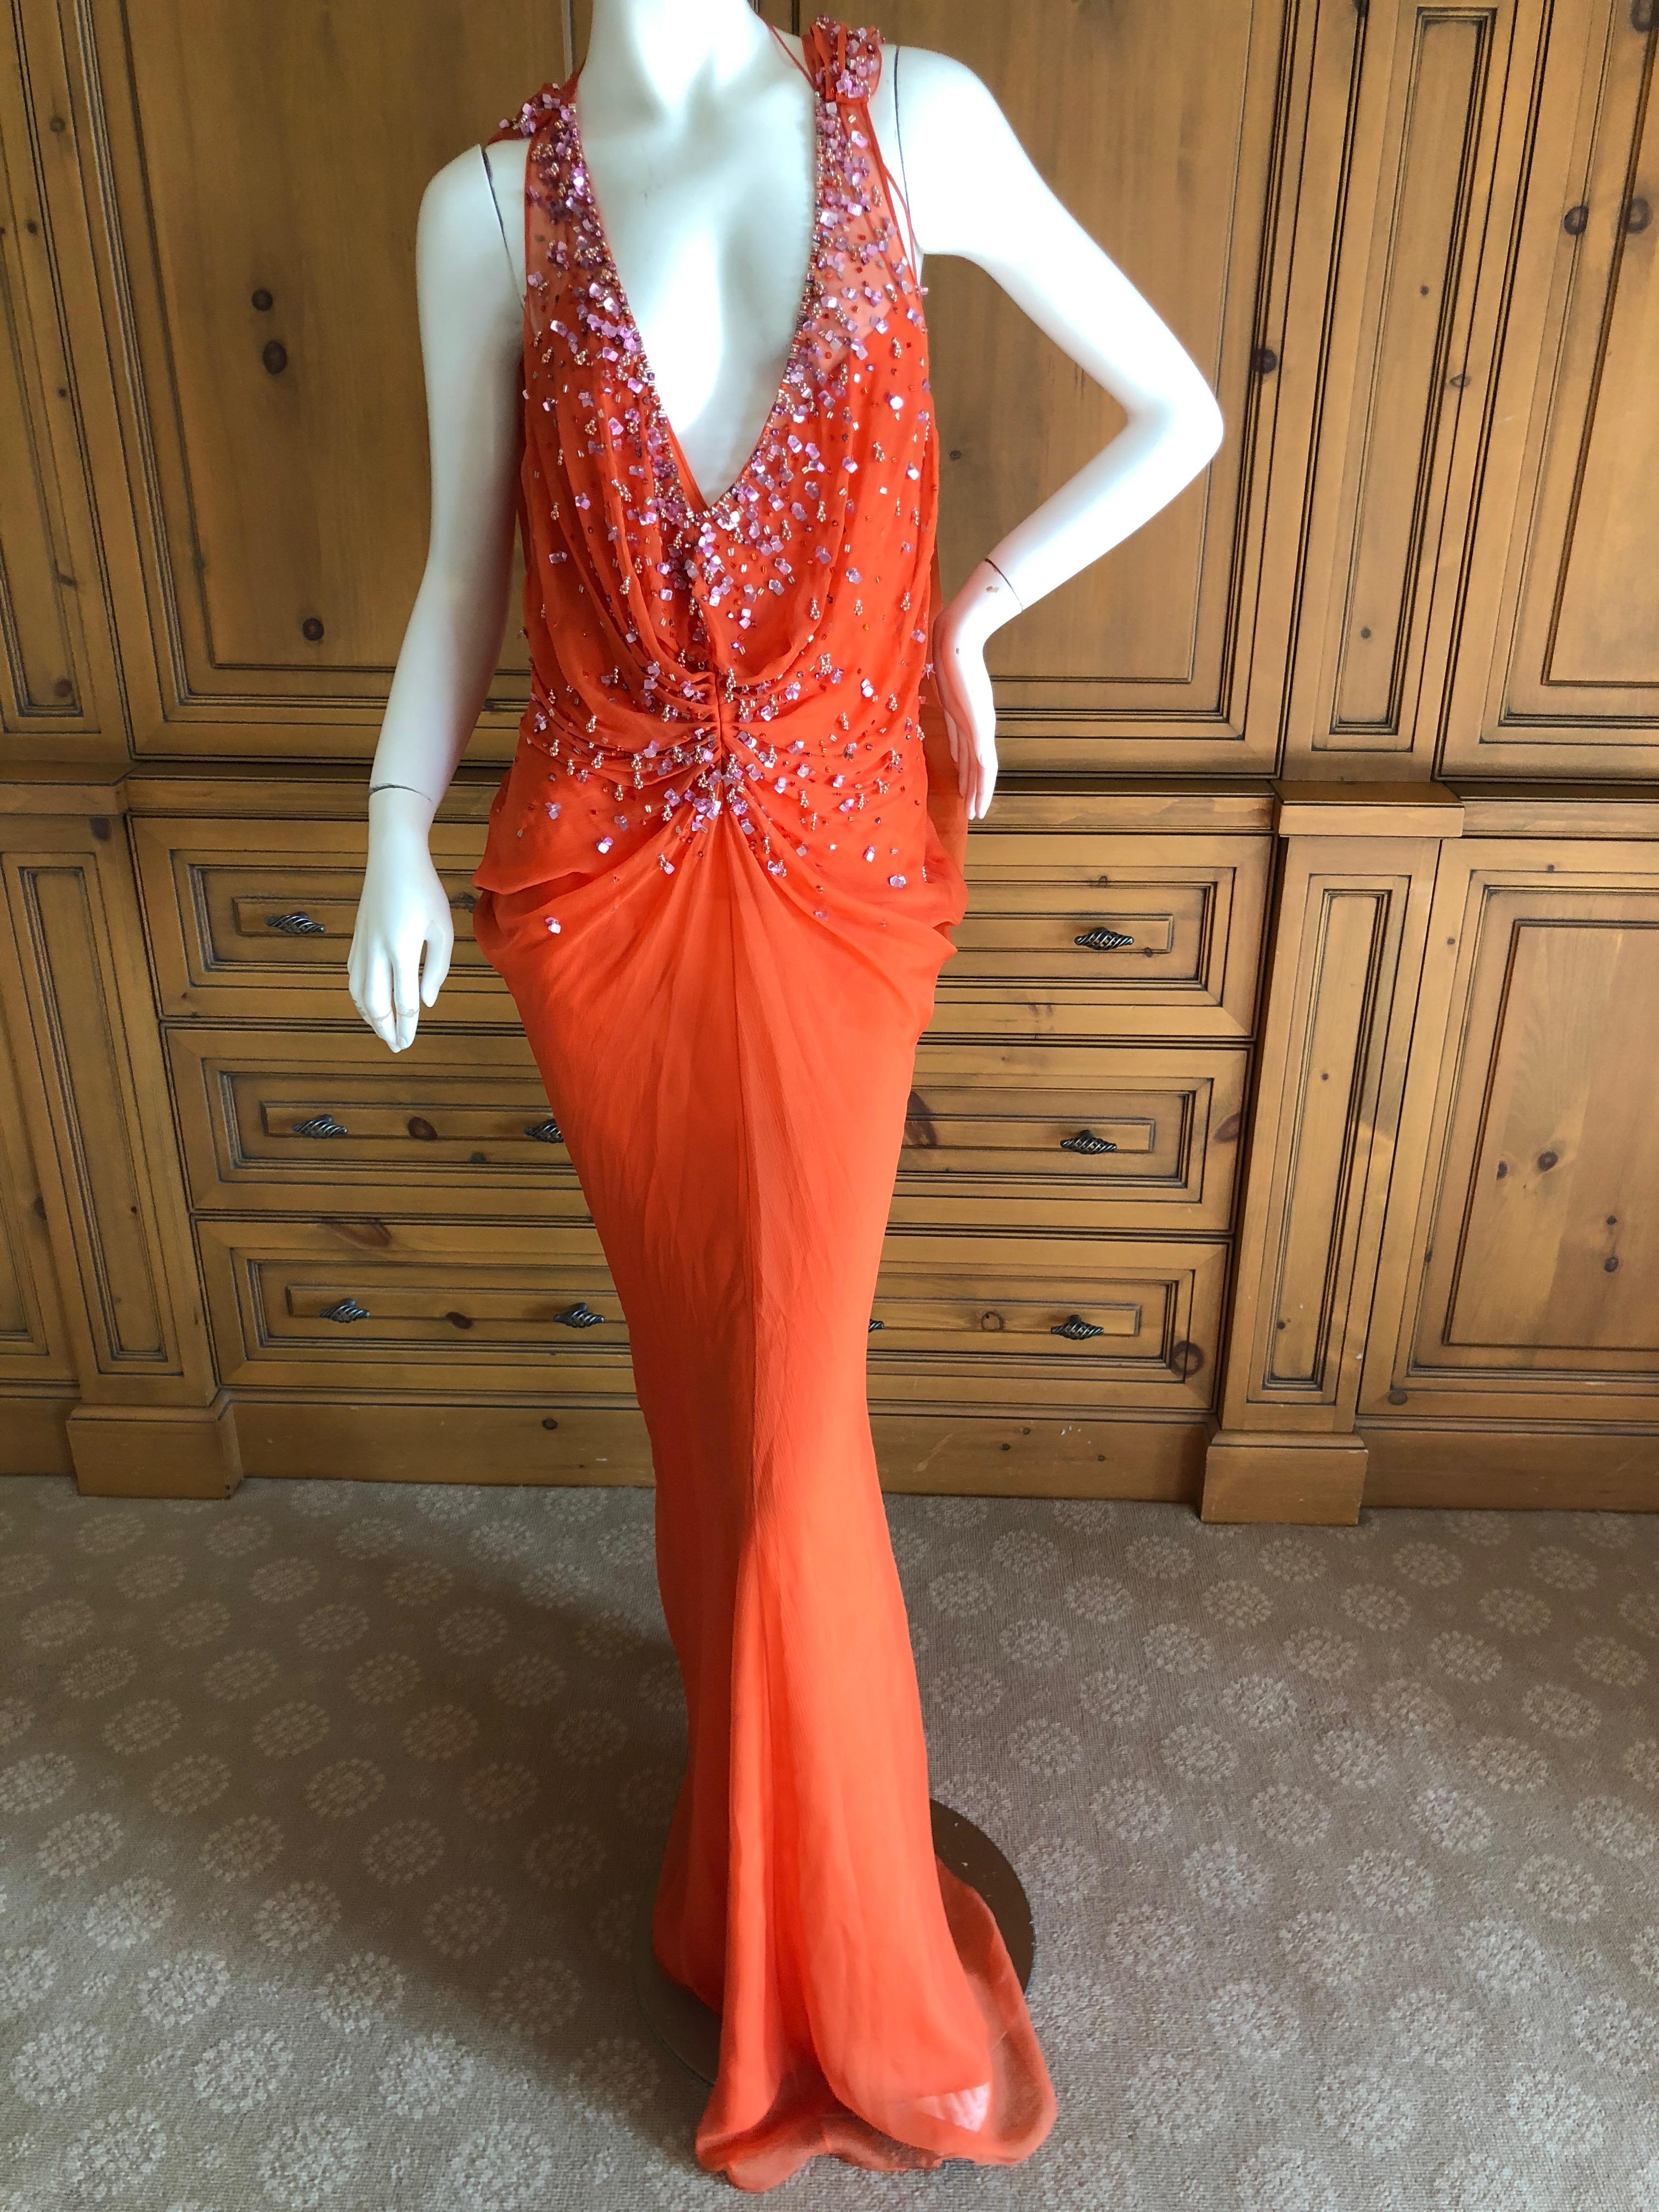 Christian Dior by John Galliano Low Cut Embellished Orange Silk Evening Dress.
This is so pretty, please use the zoom to see the details.
Size 38
 Bust 36